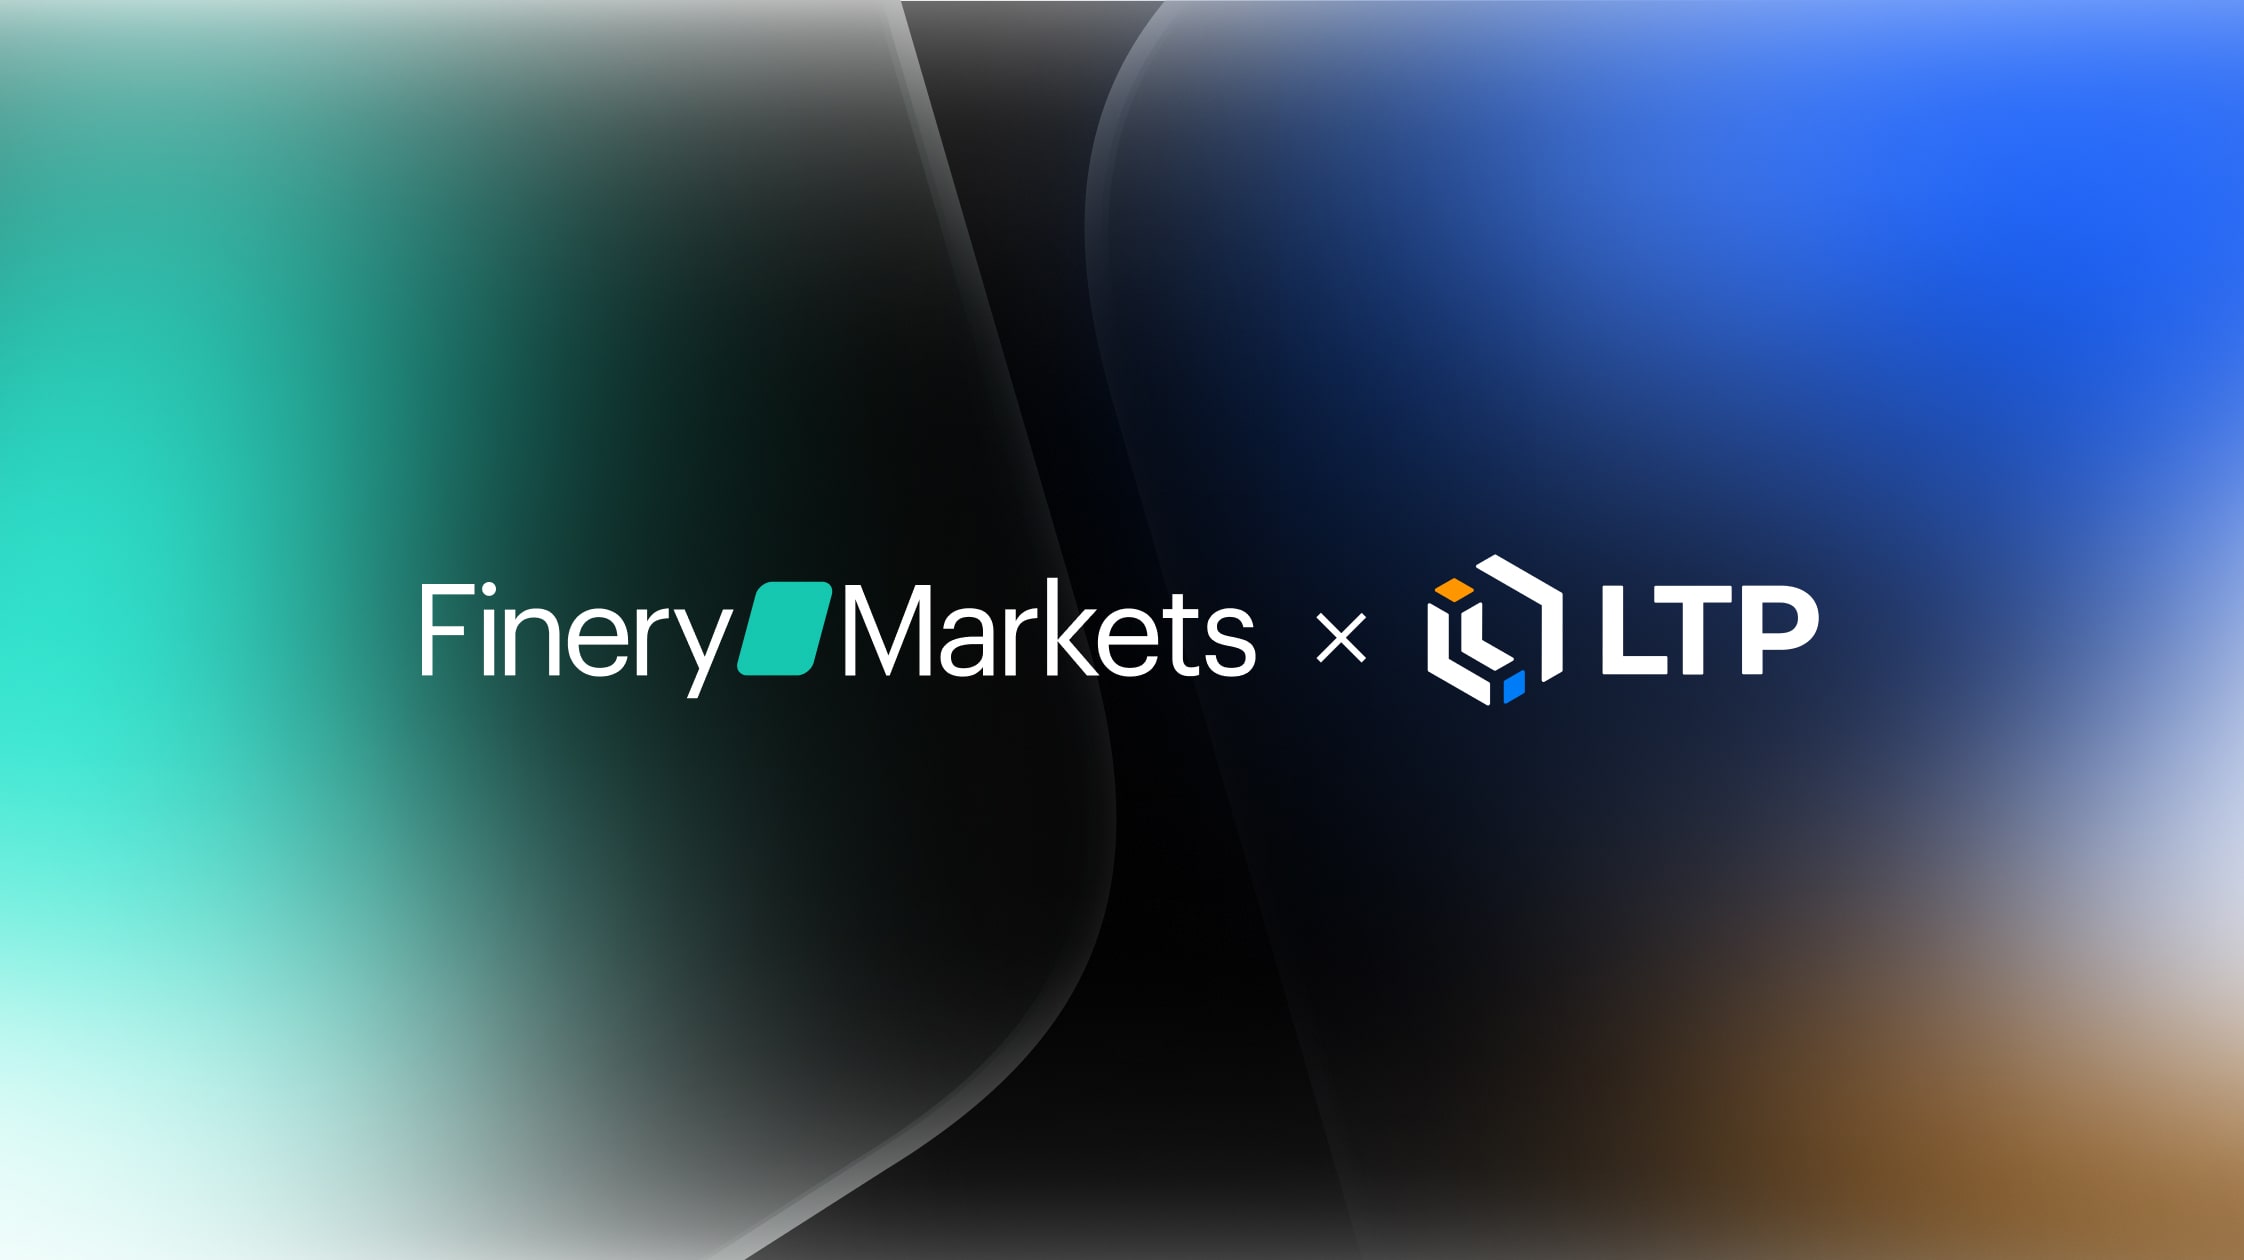 Leading Digital Assets Prime Broker LTP Launches Toxic Flow-Free OTC Prime Brokerage with Finery Markets